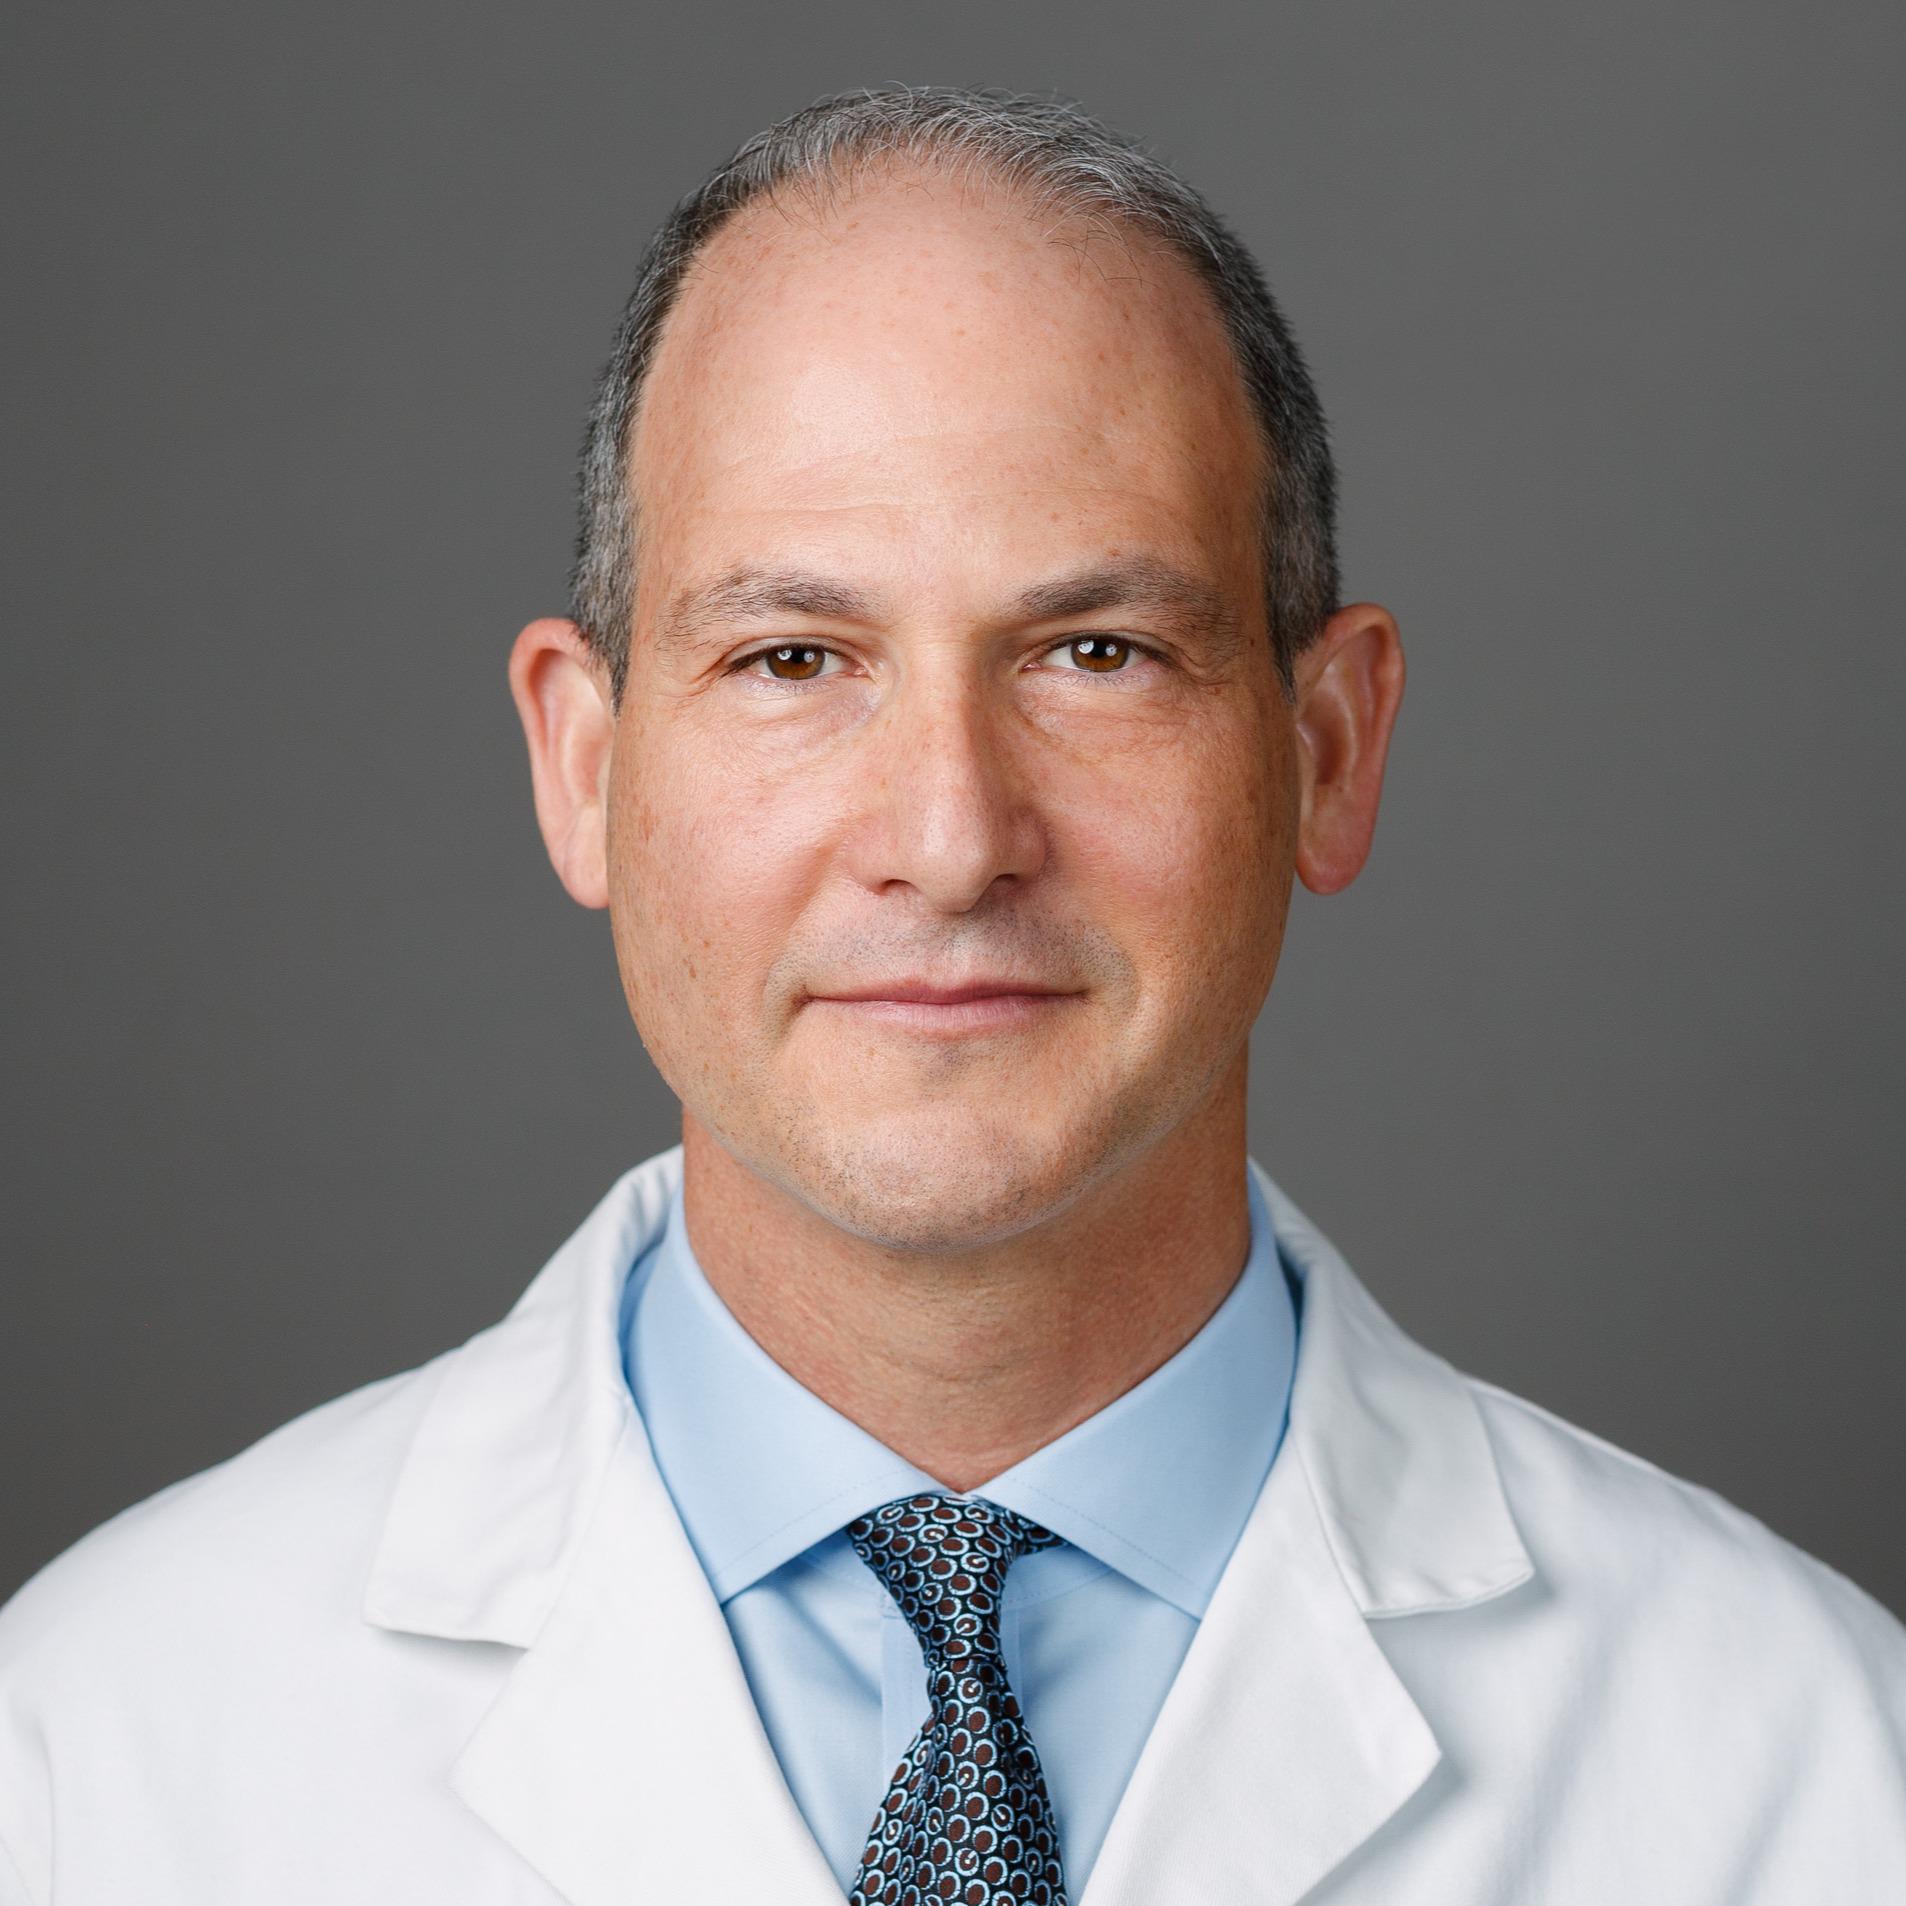 Dr. S. Robert Rozbruch - Hospital for Special Surgery S. Robert Rozbruch, MD New York (212)606-1415